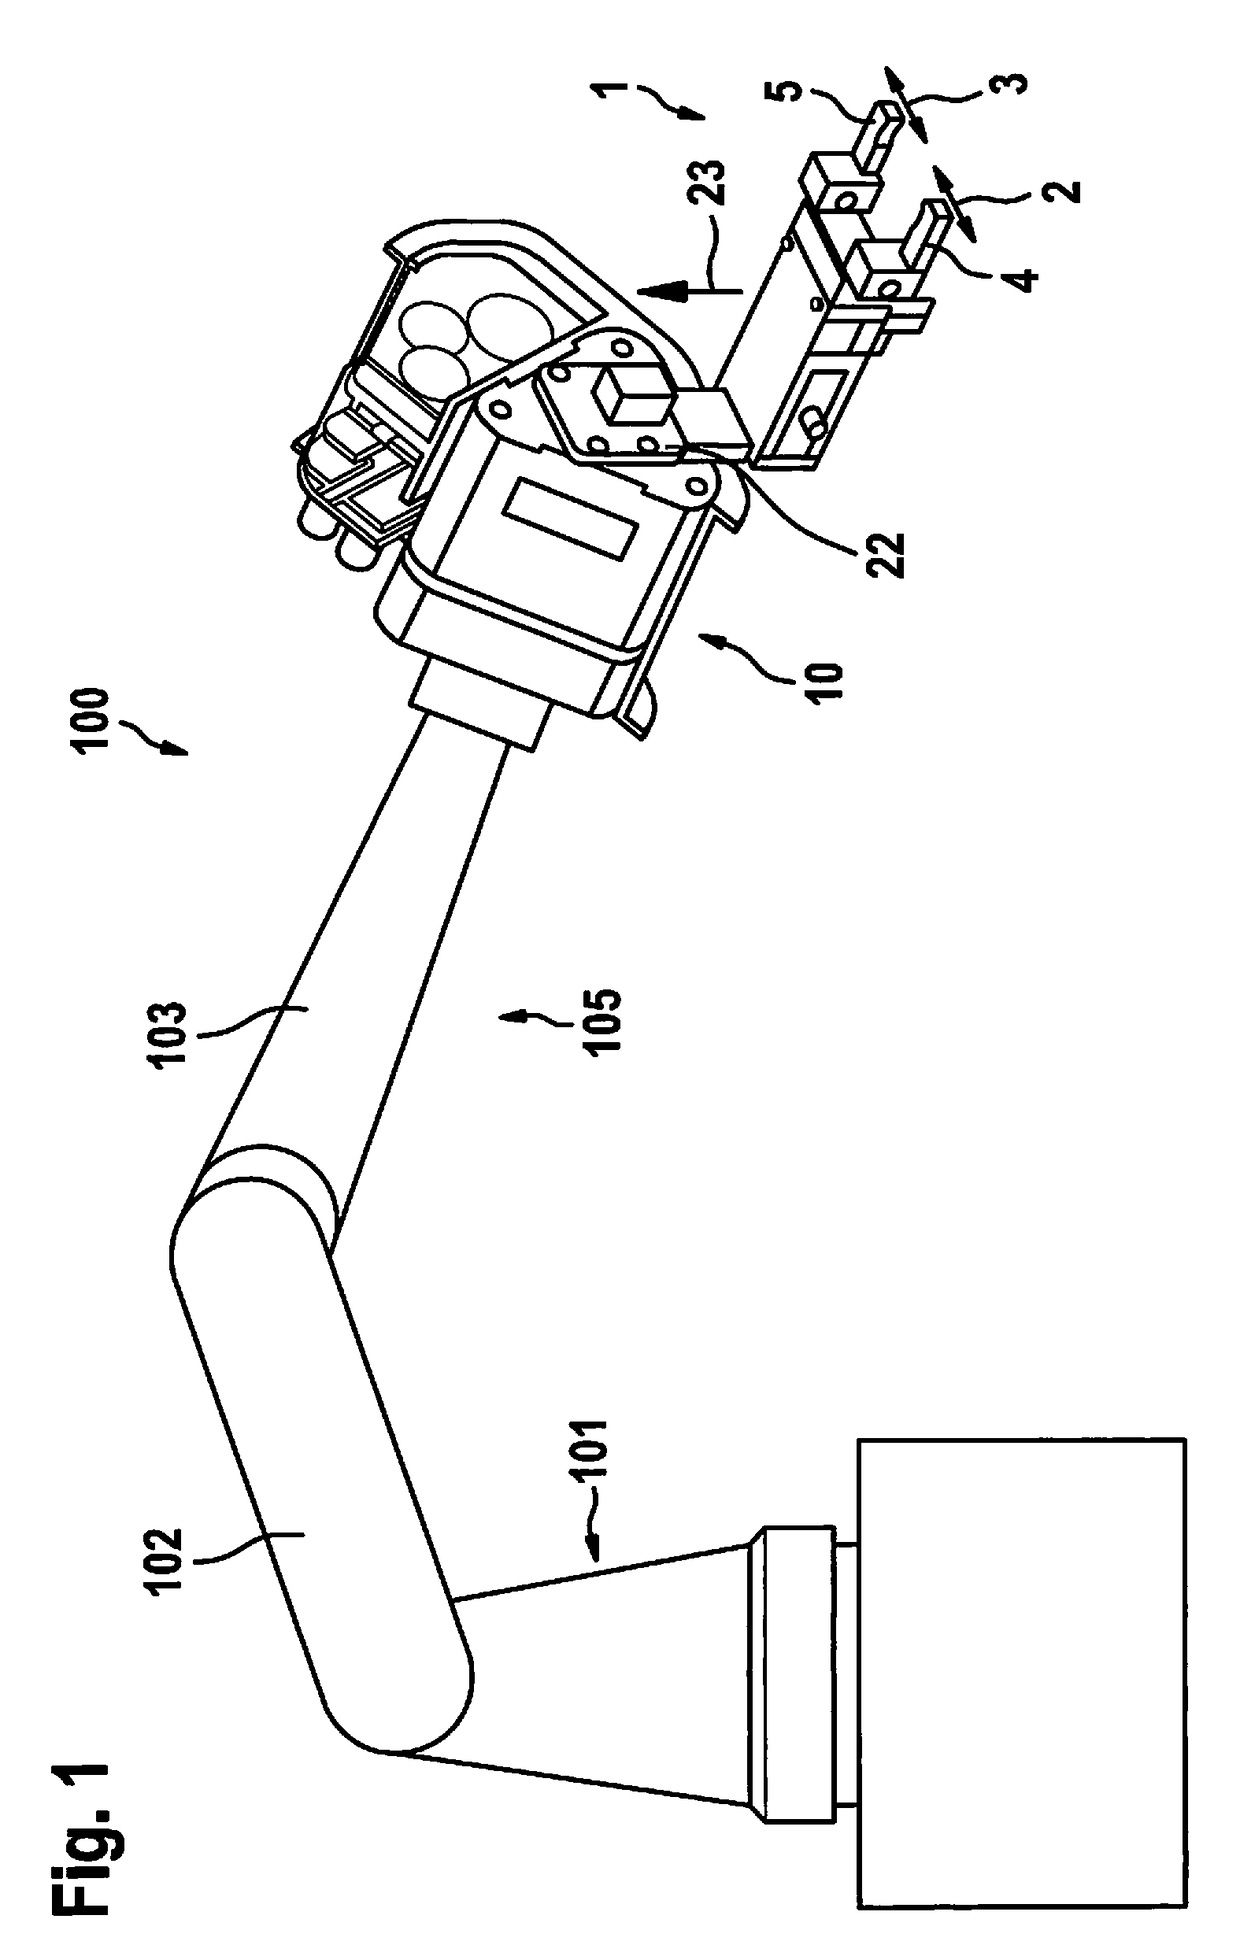 Protection apparatus for a manipulation device on a handling device, as well as handling device